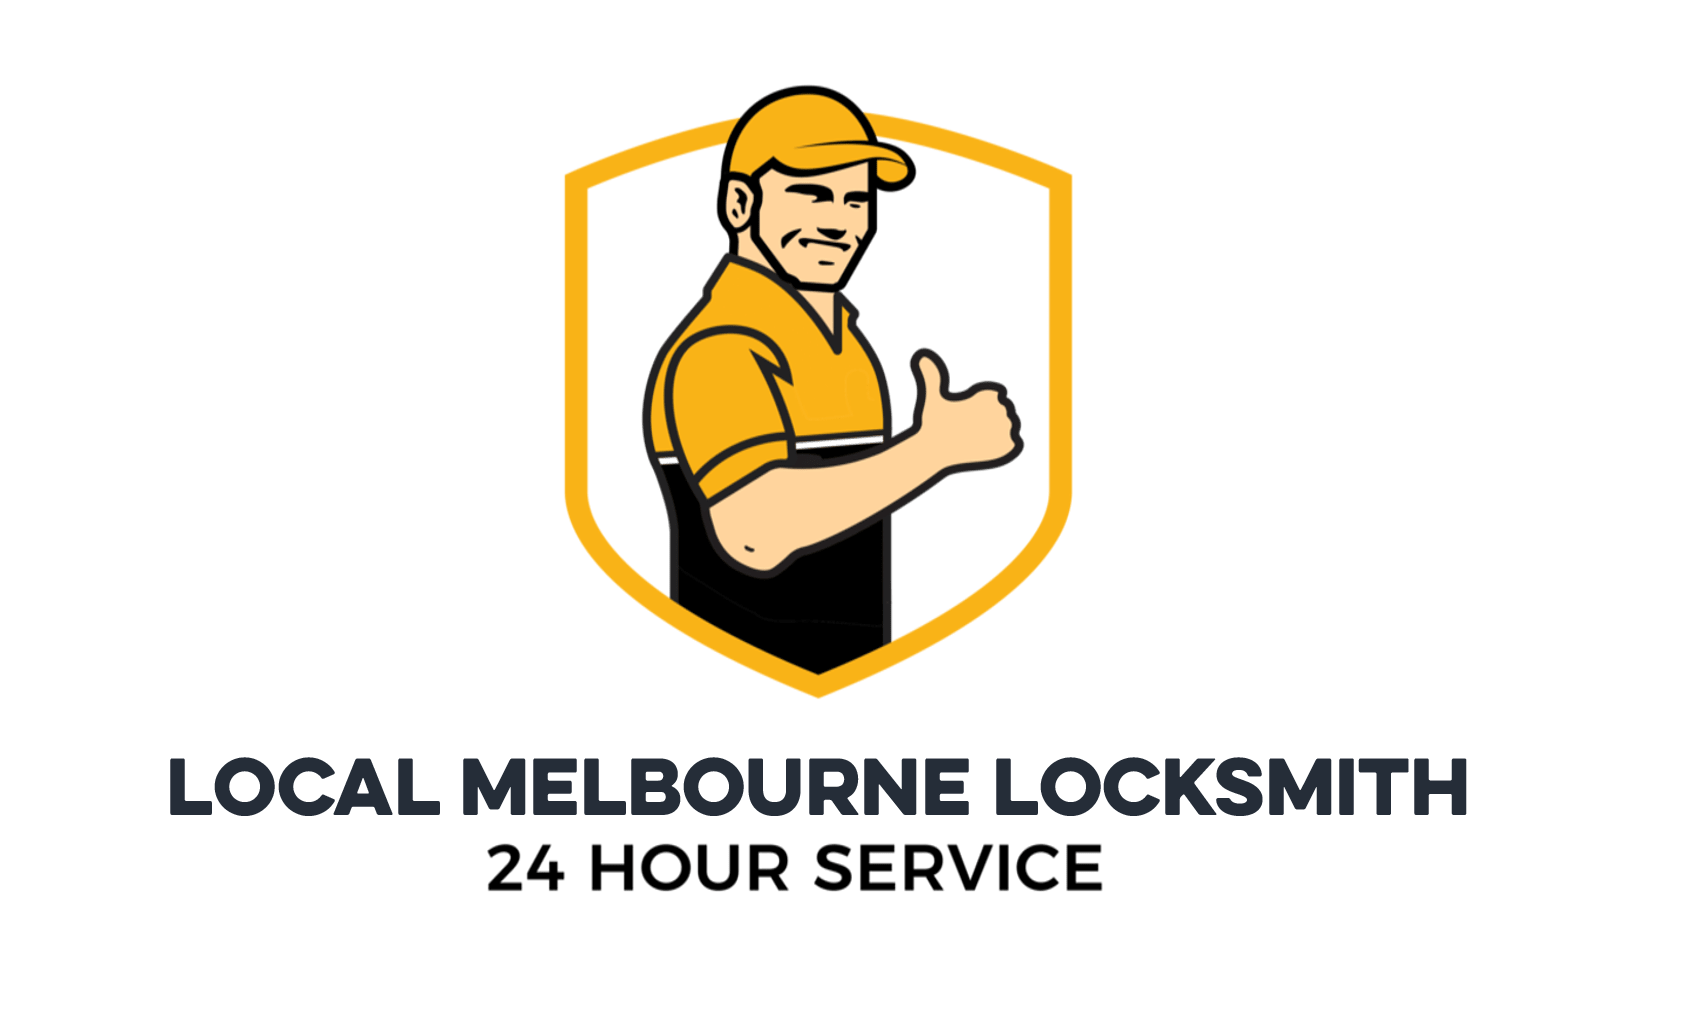 Local Melbourne Locksmith Explains How To Find a Reliable Locksmith for Emergencies